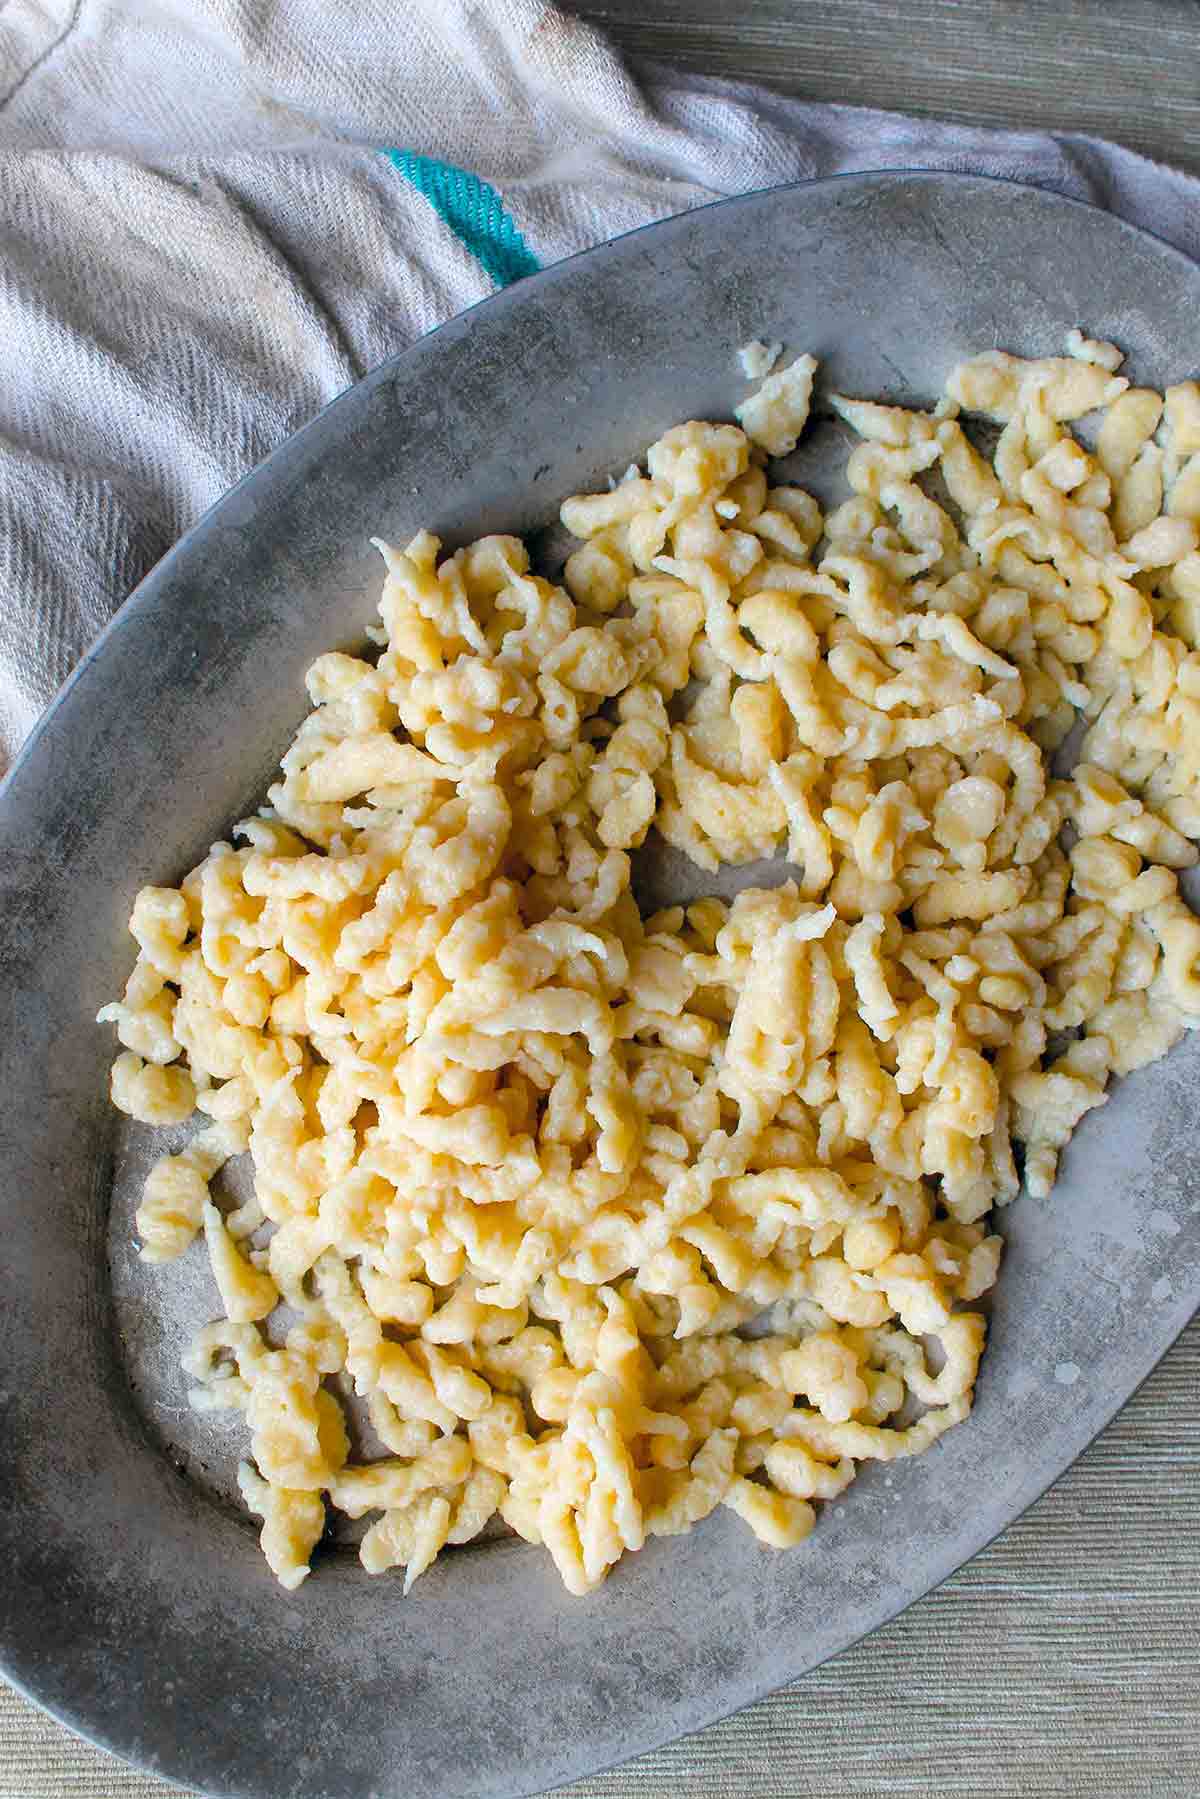 An oval platter filled with homemade spaetzle.